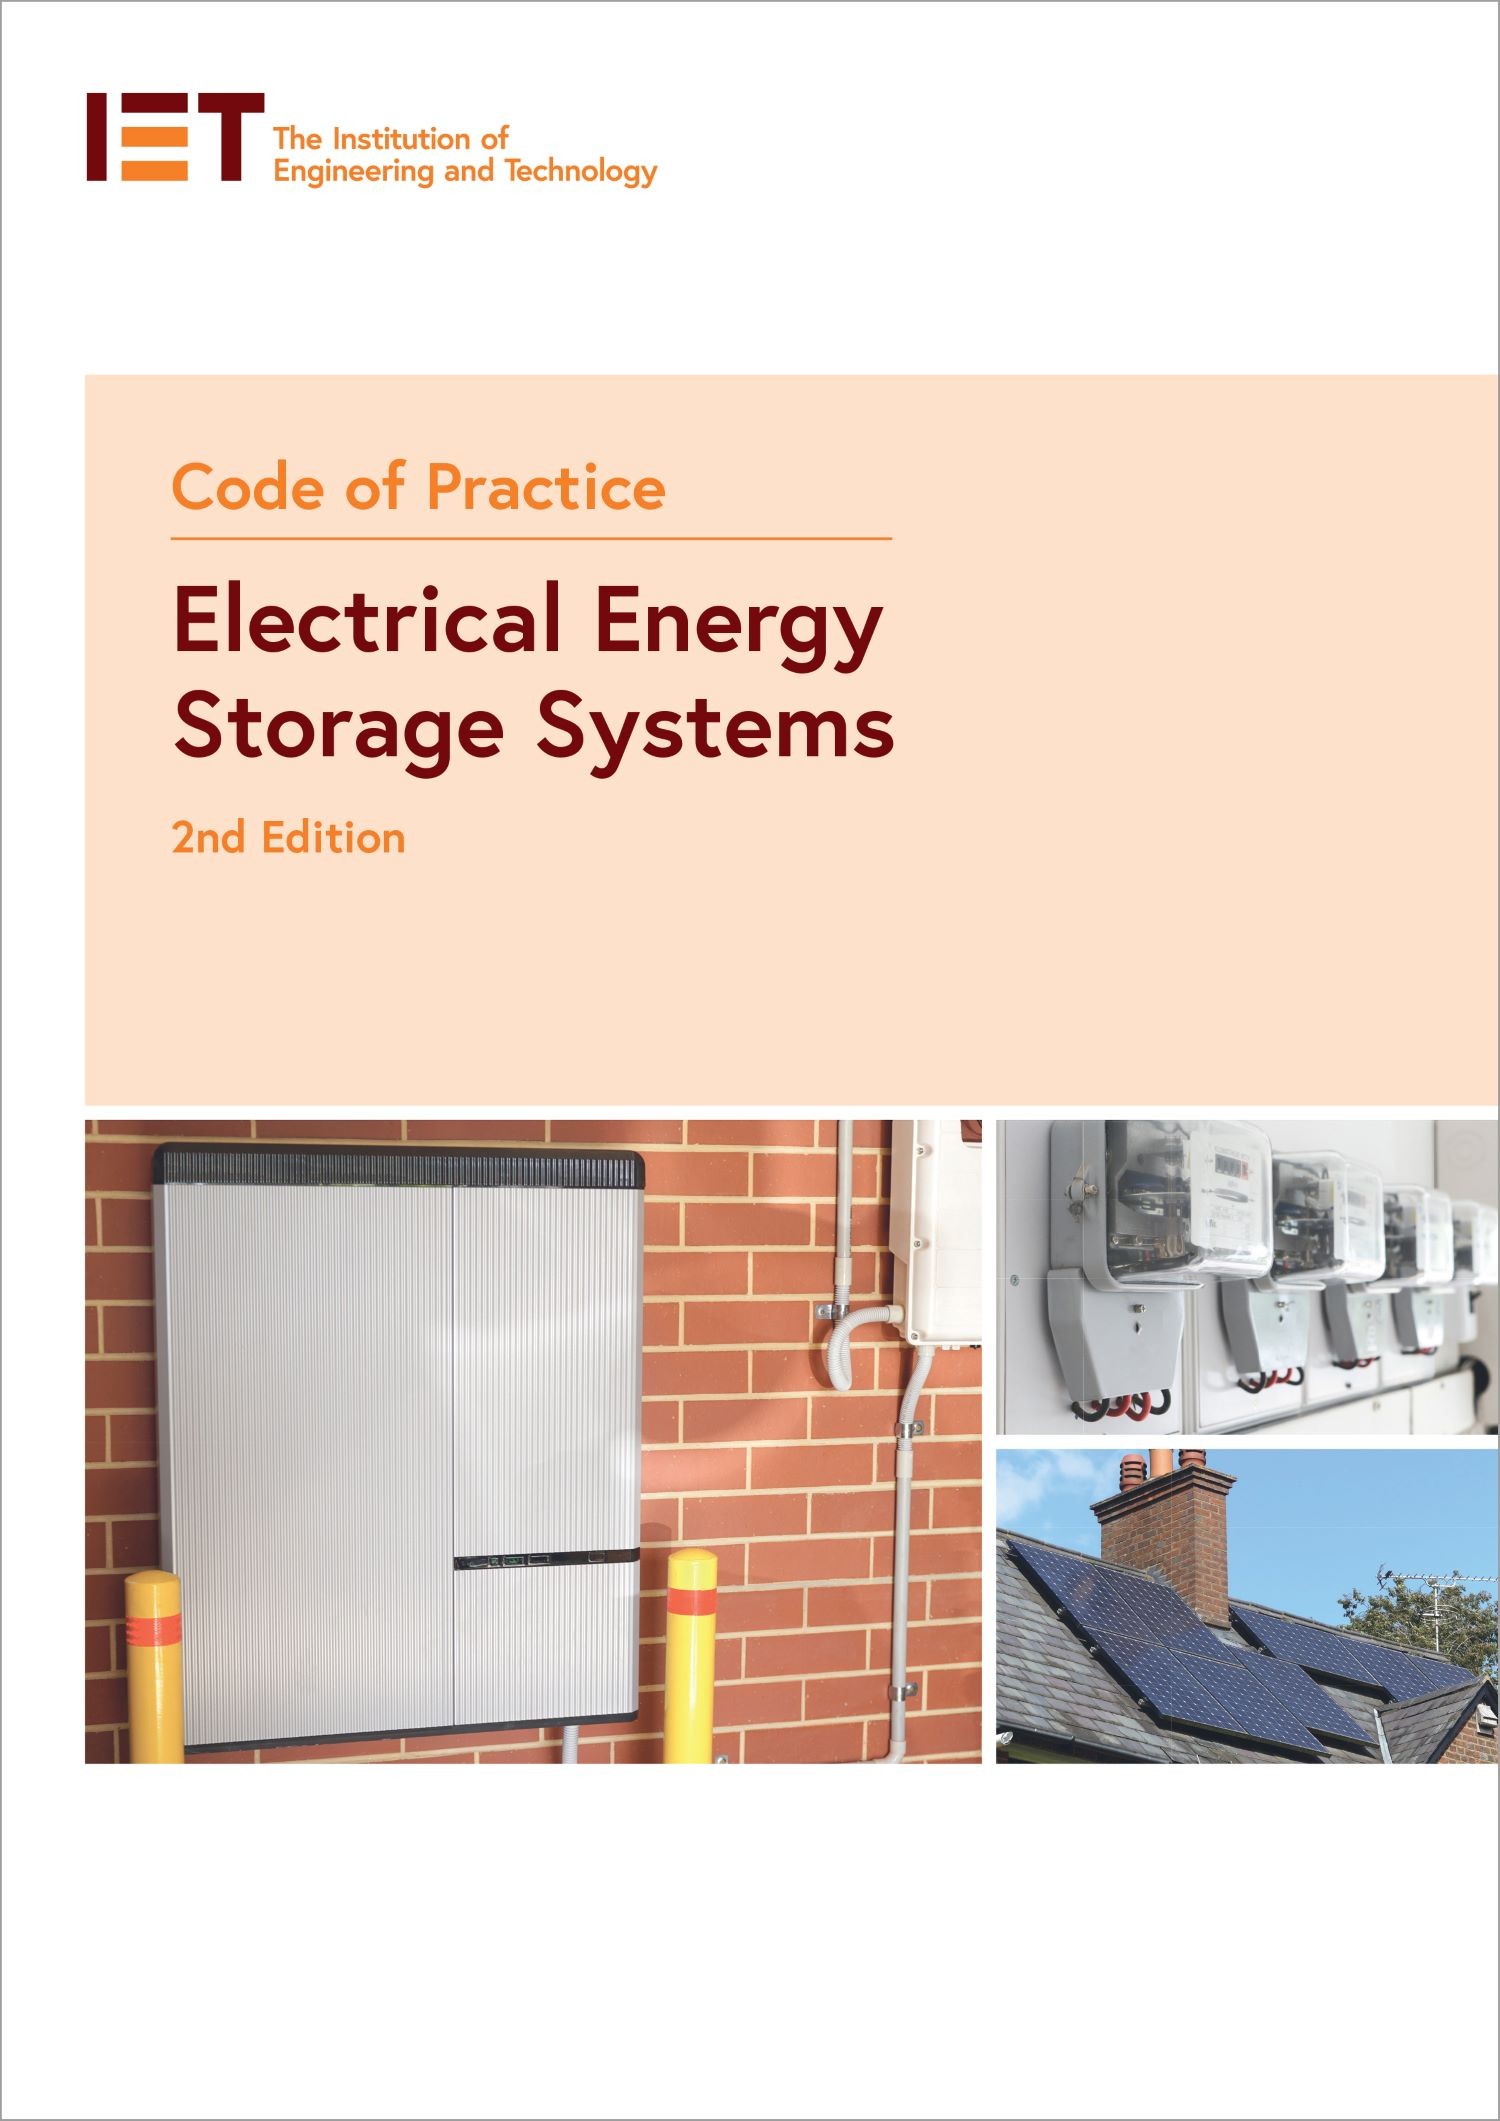 IET Code of Practice Electrical Energy Storage Systems (2nd Edition)